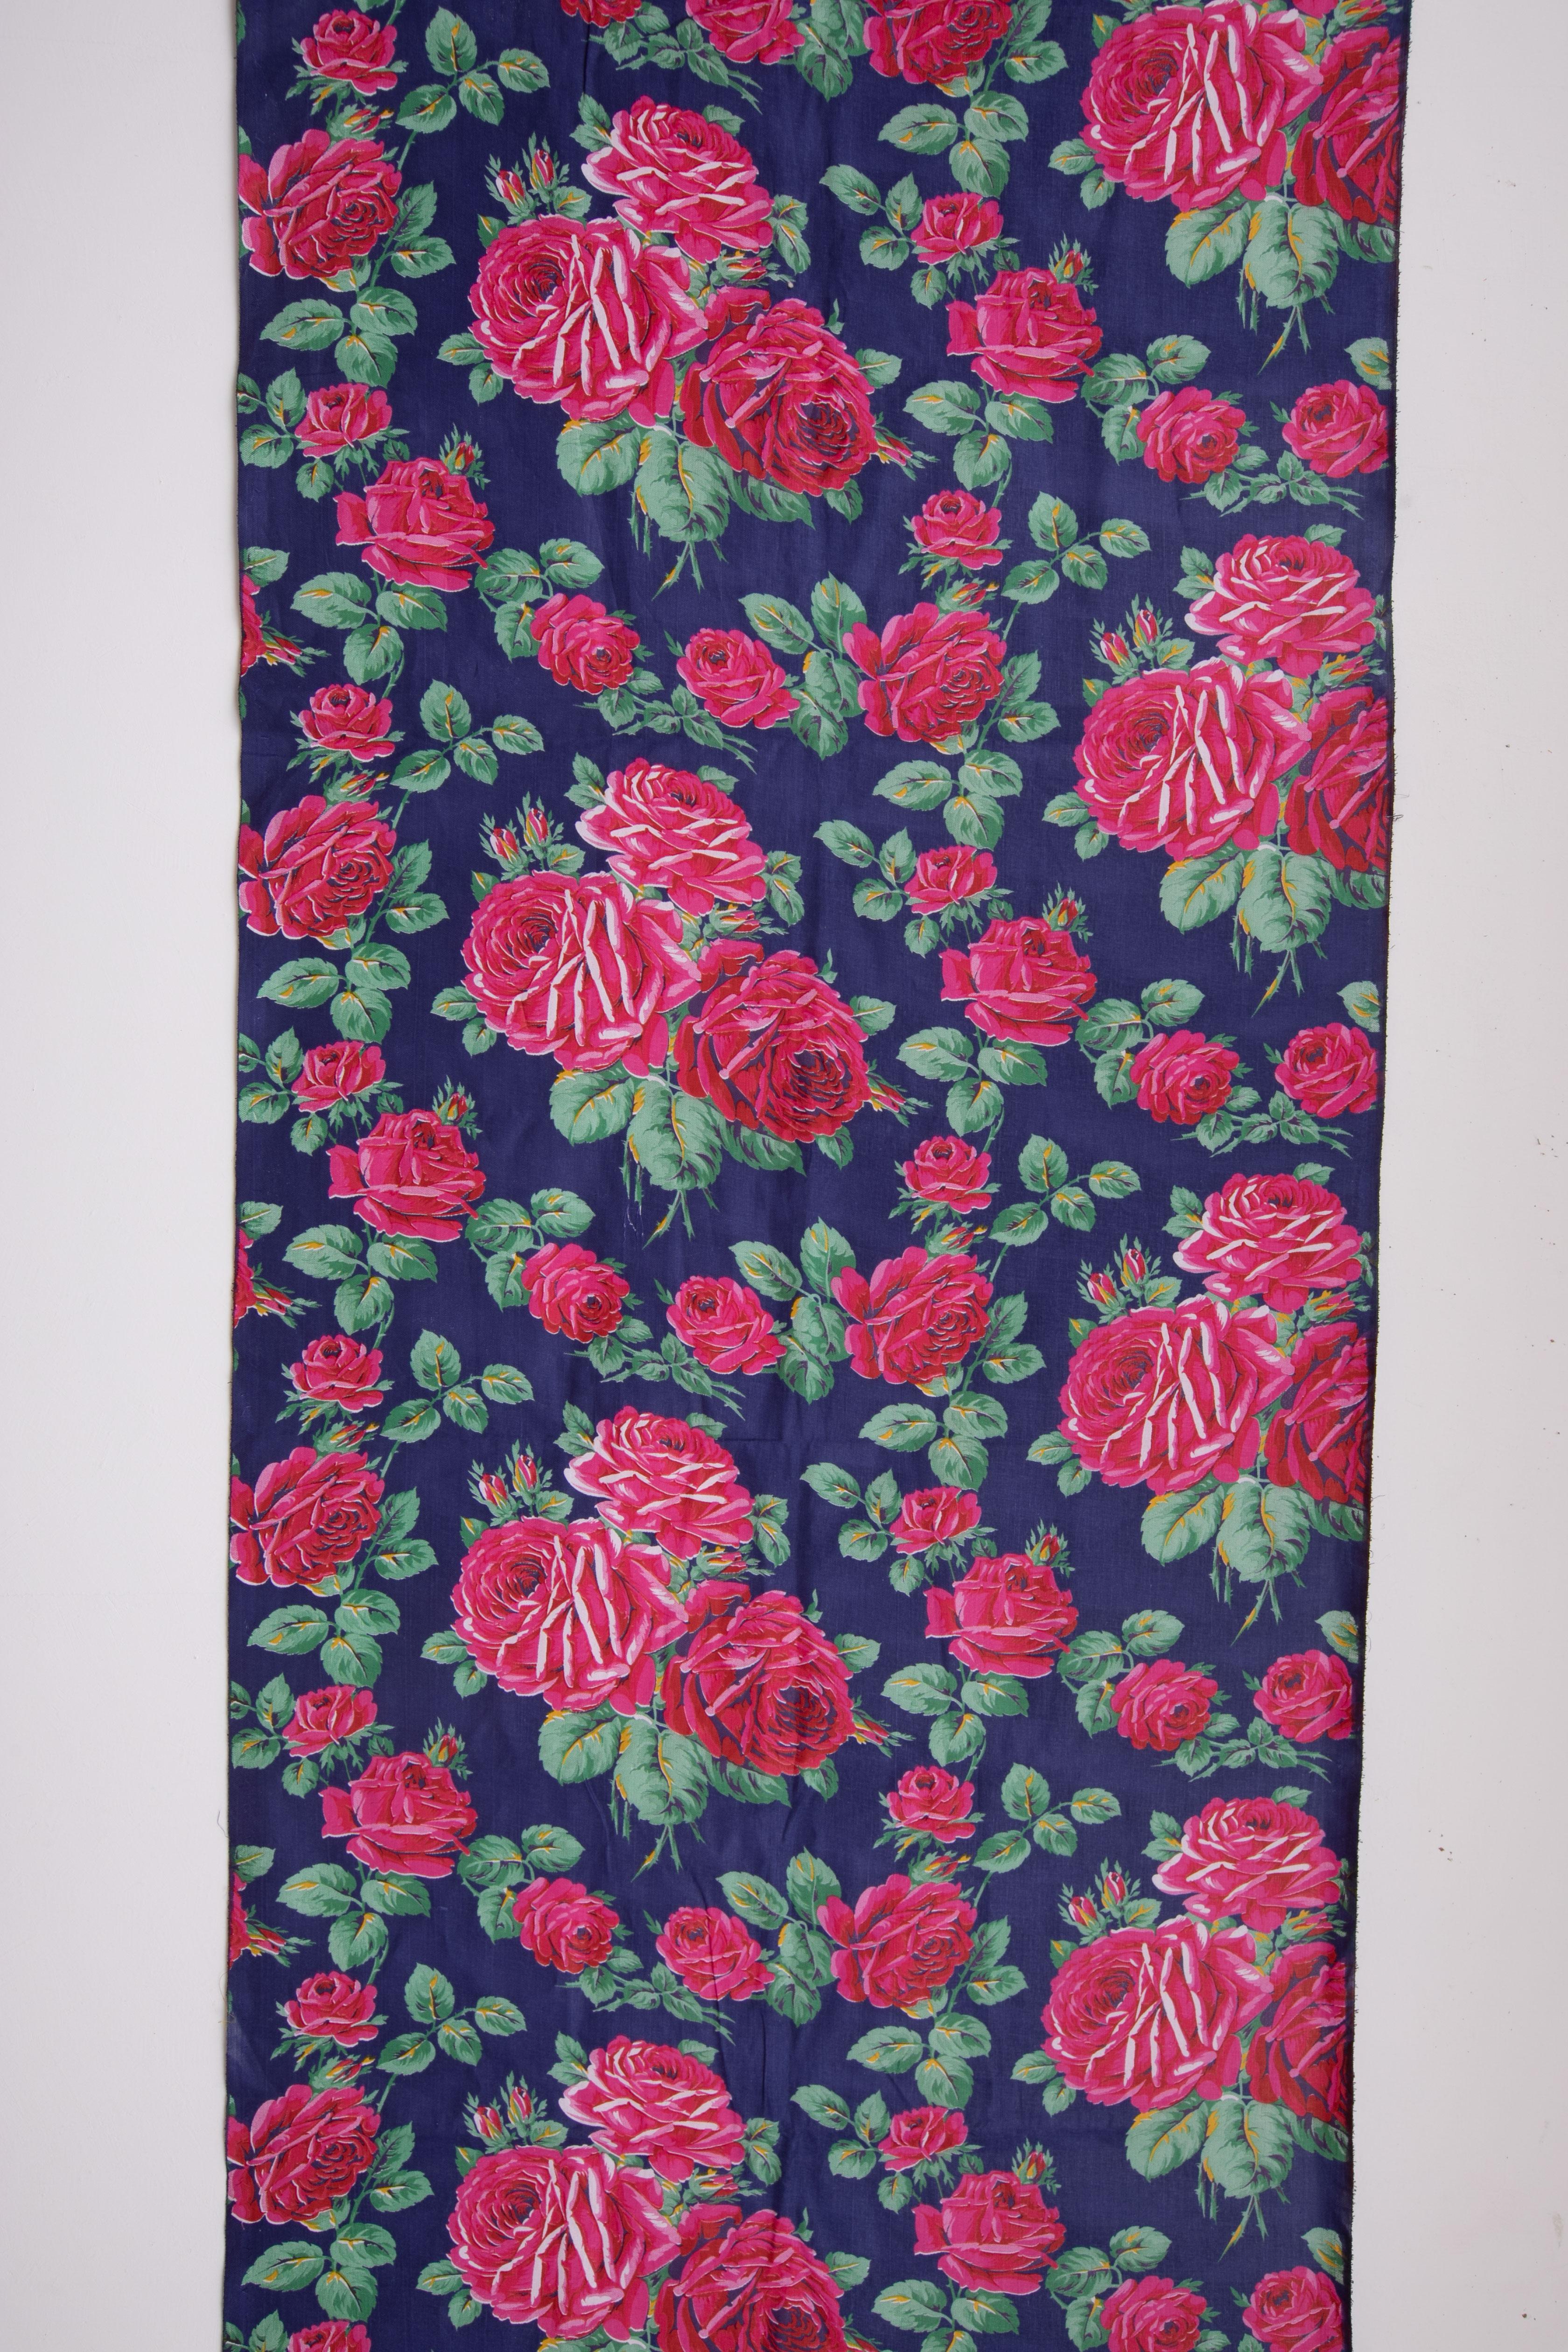 roller printed fabric